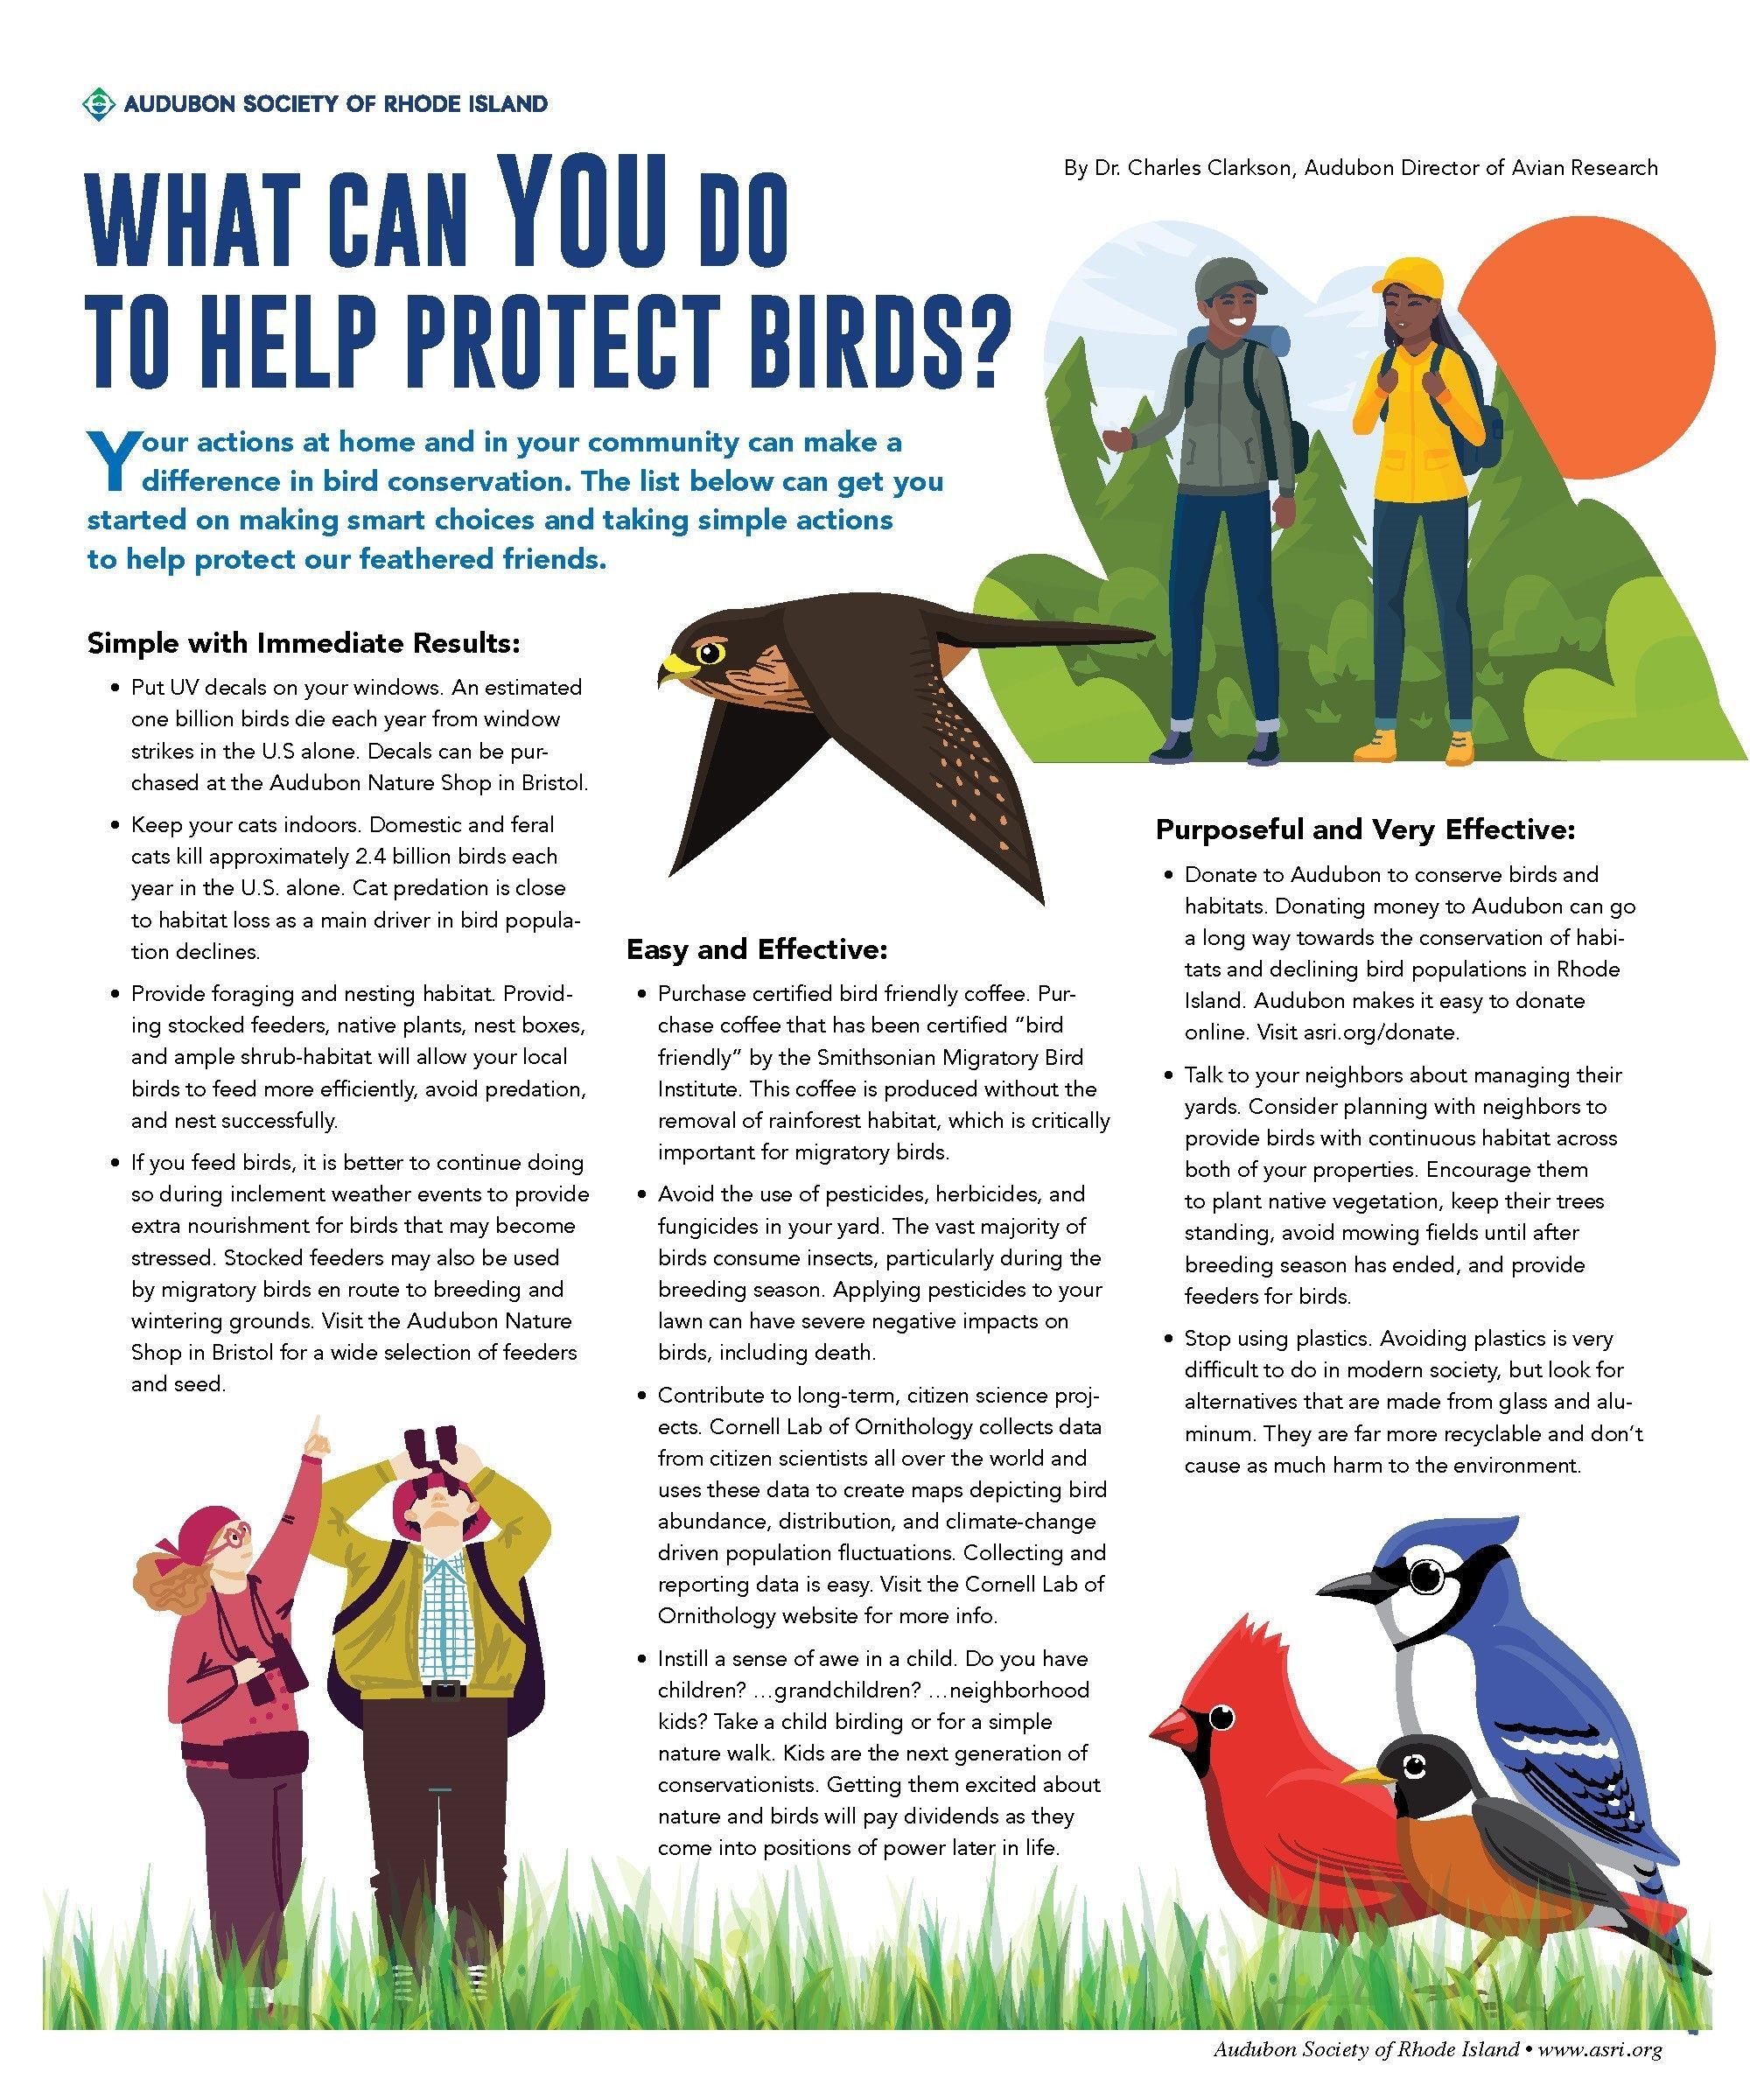 What Can You Do to Protect Birds?